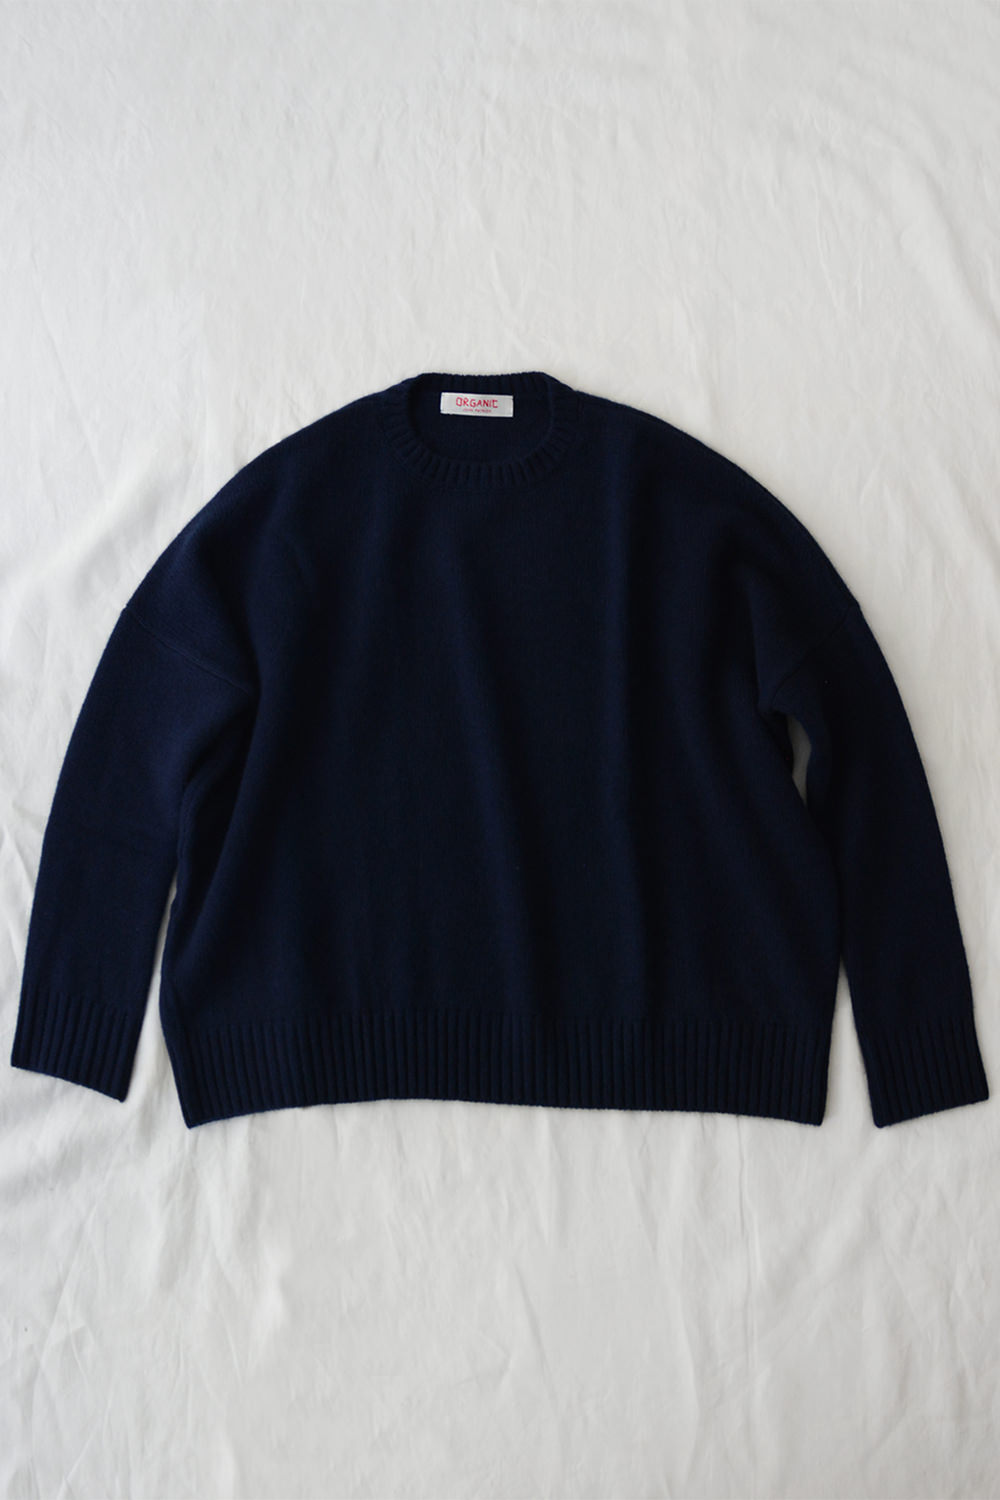 Organic by John Patrick Cashmere Sweater a Top Picture